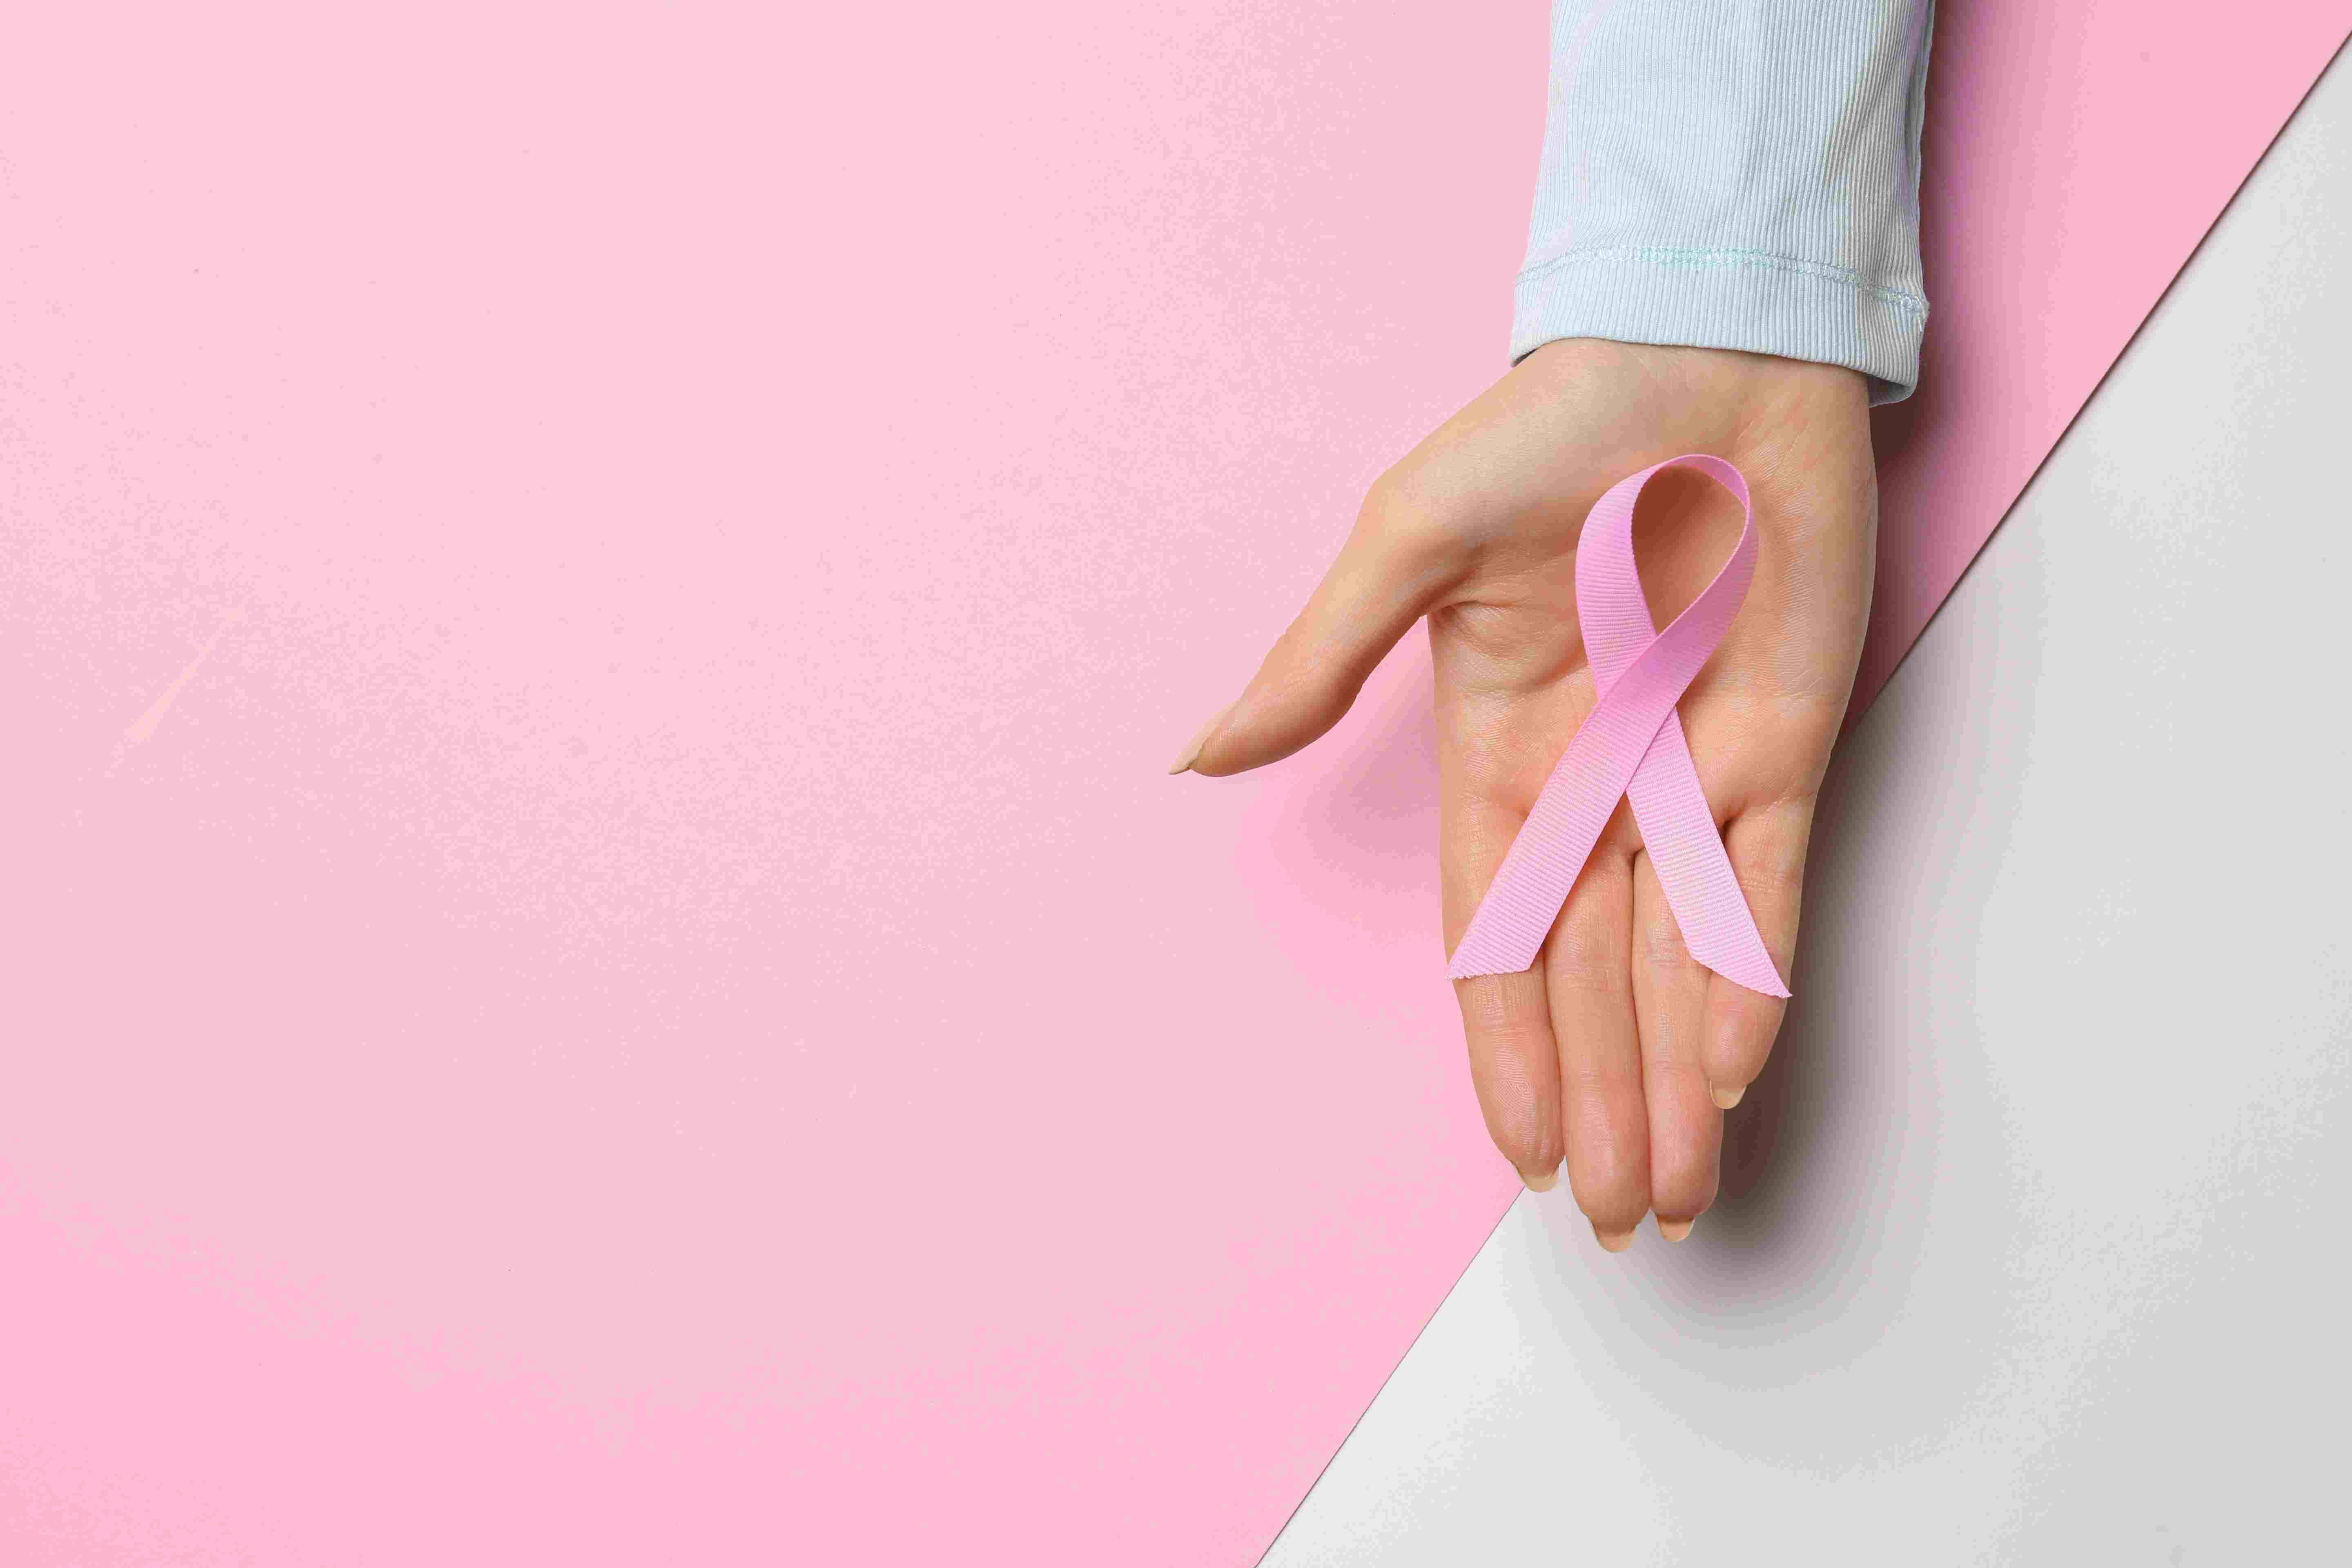 early-diagnosis-of-breast-cancer-can-be-lifesaving-awareness-is-the-best-policy